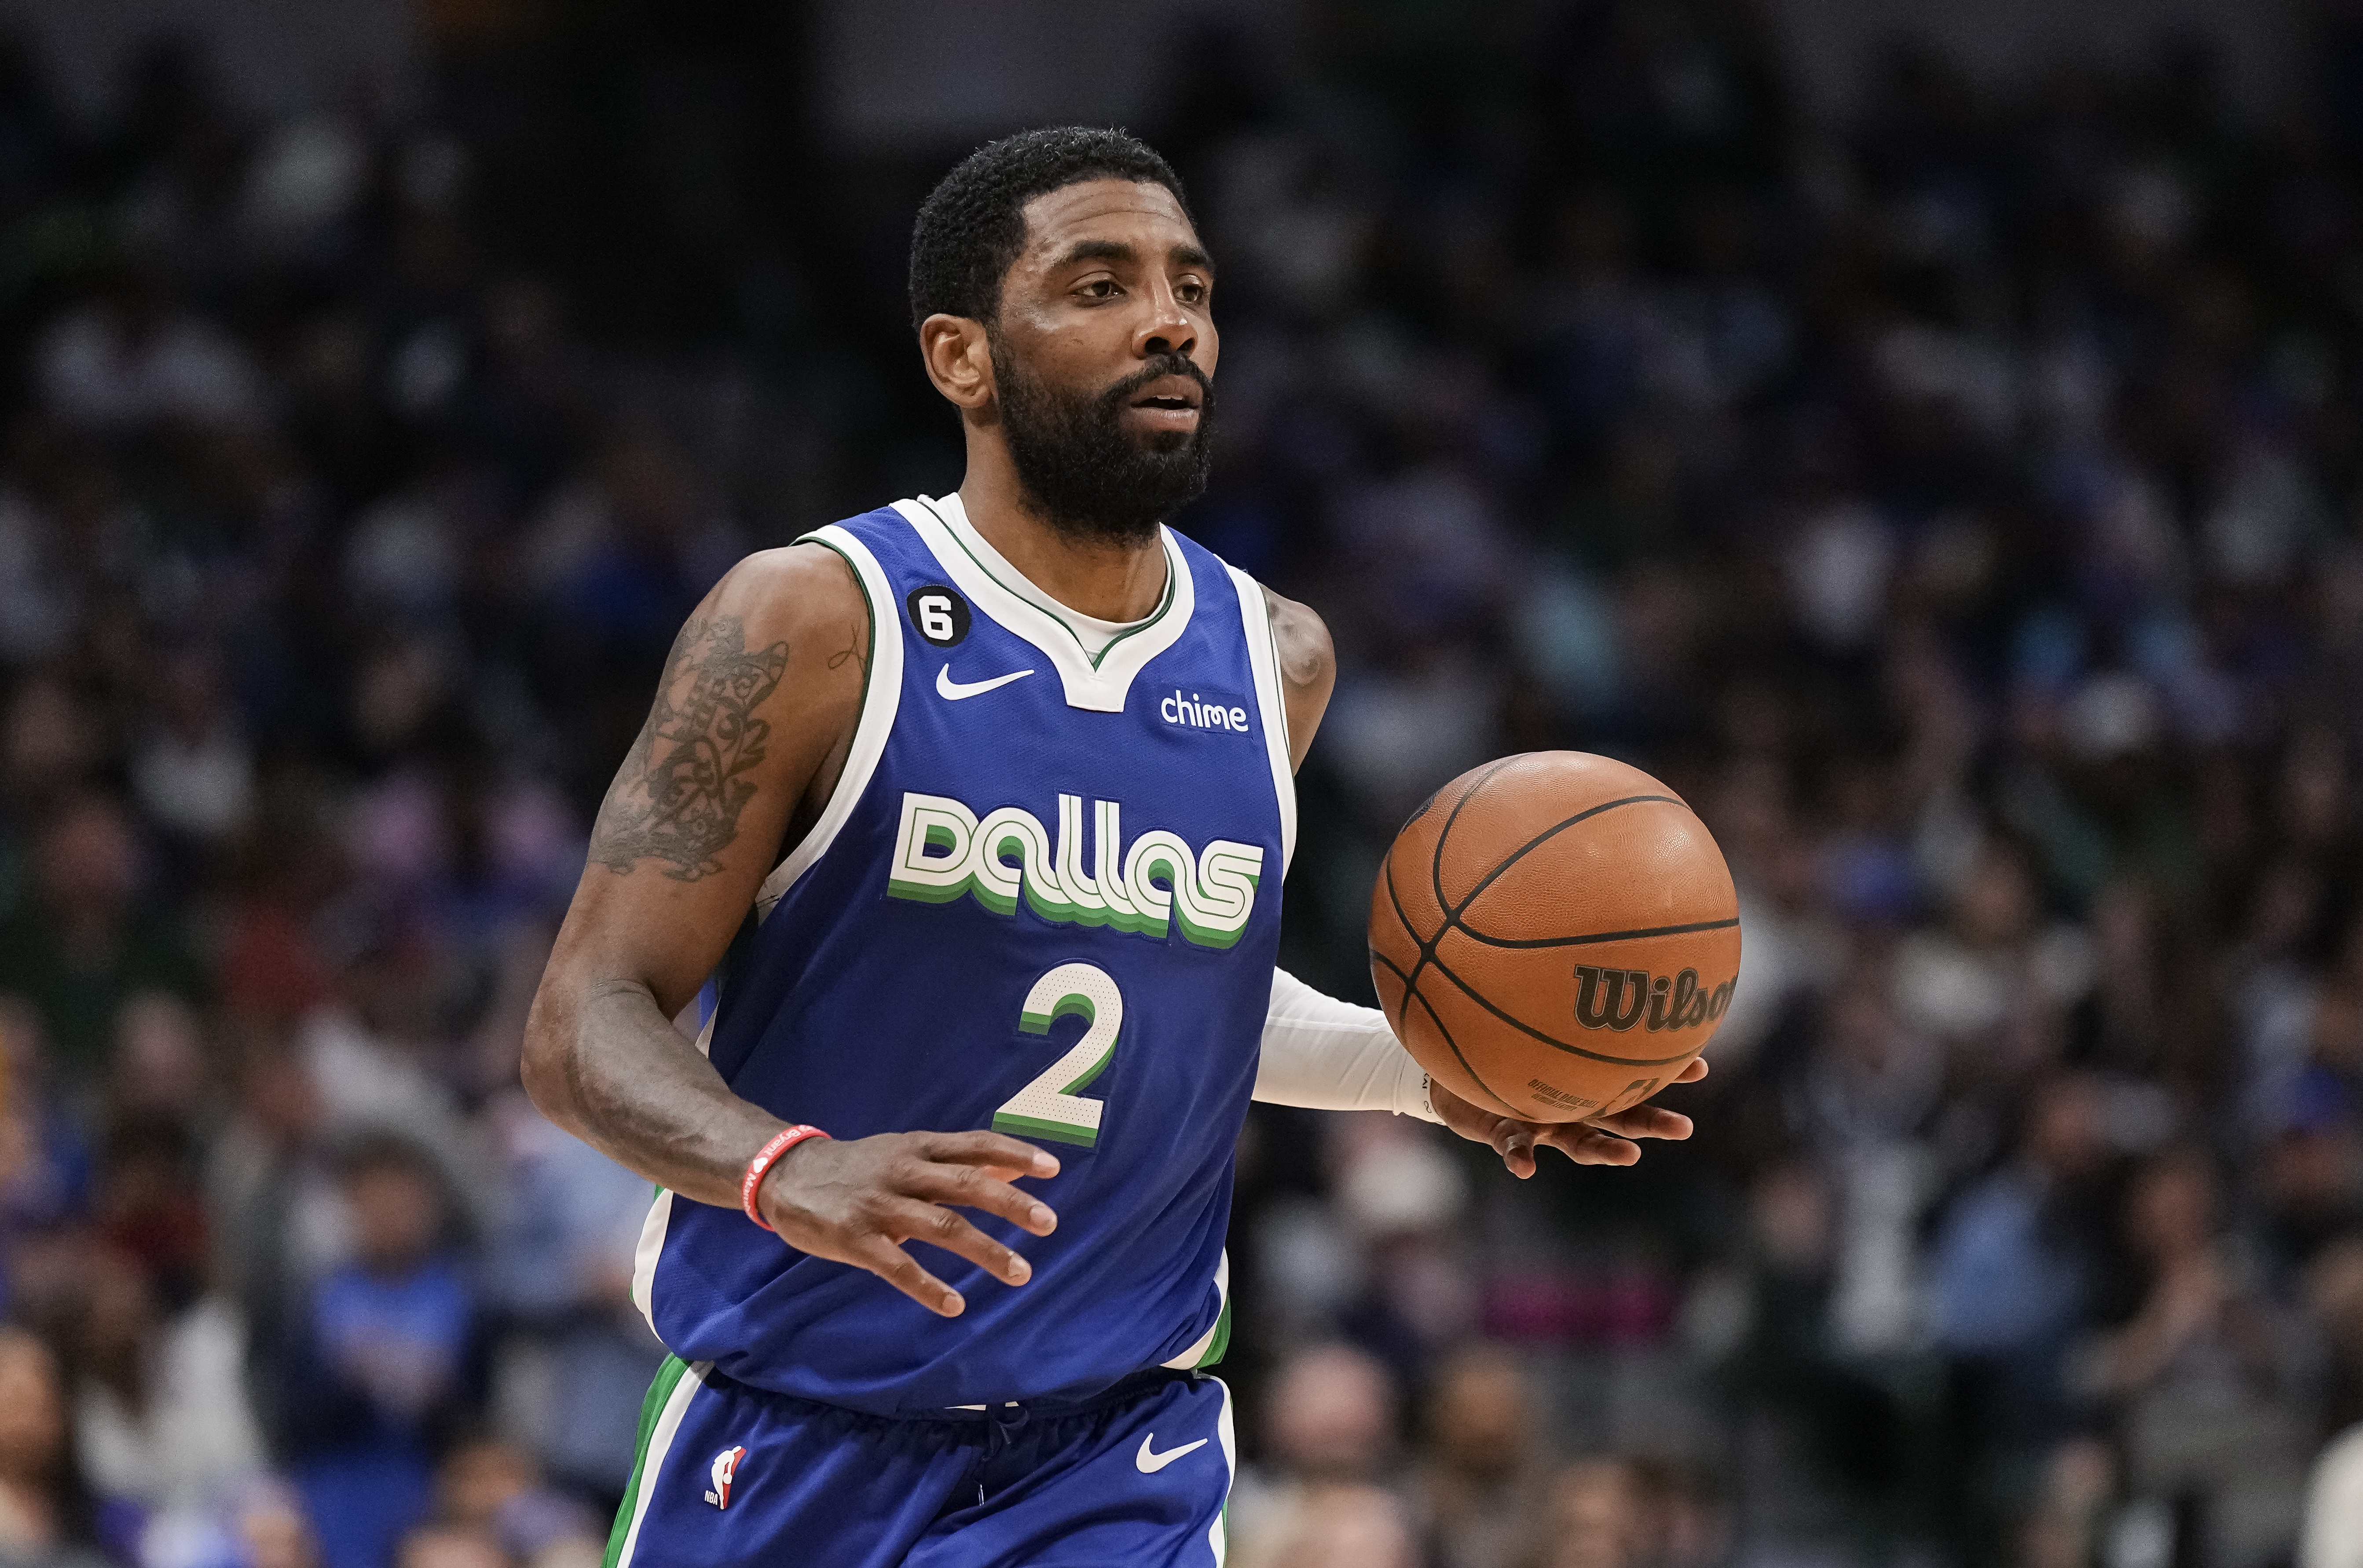 Mavericks' Luka Doncic And Kyrie Irving Play In Least-Watched NBA